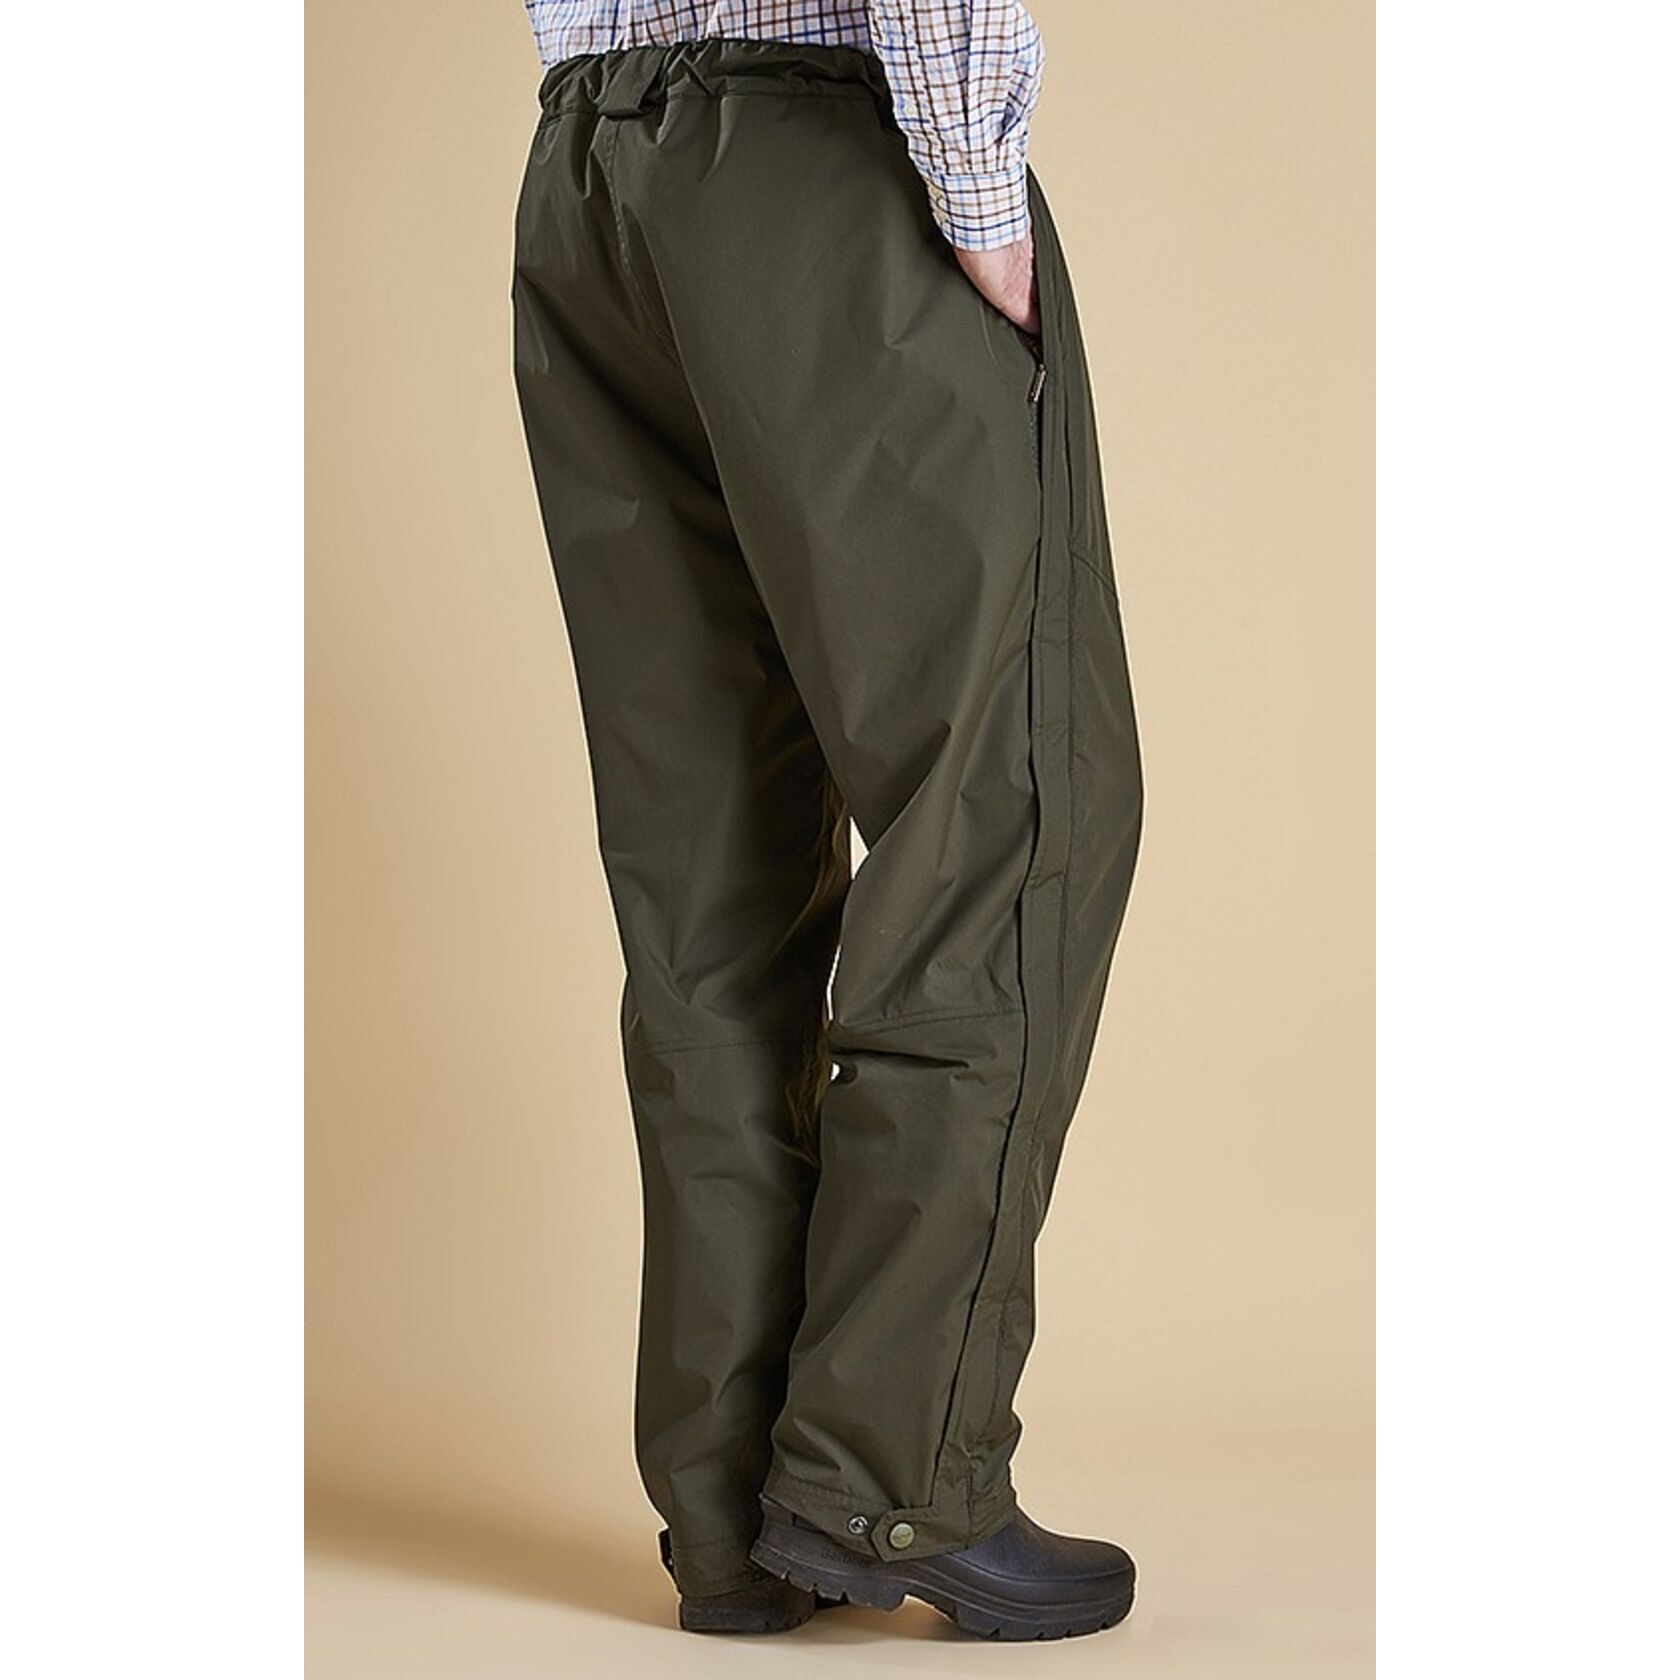 barbour waxed trousers